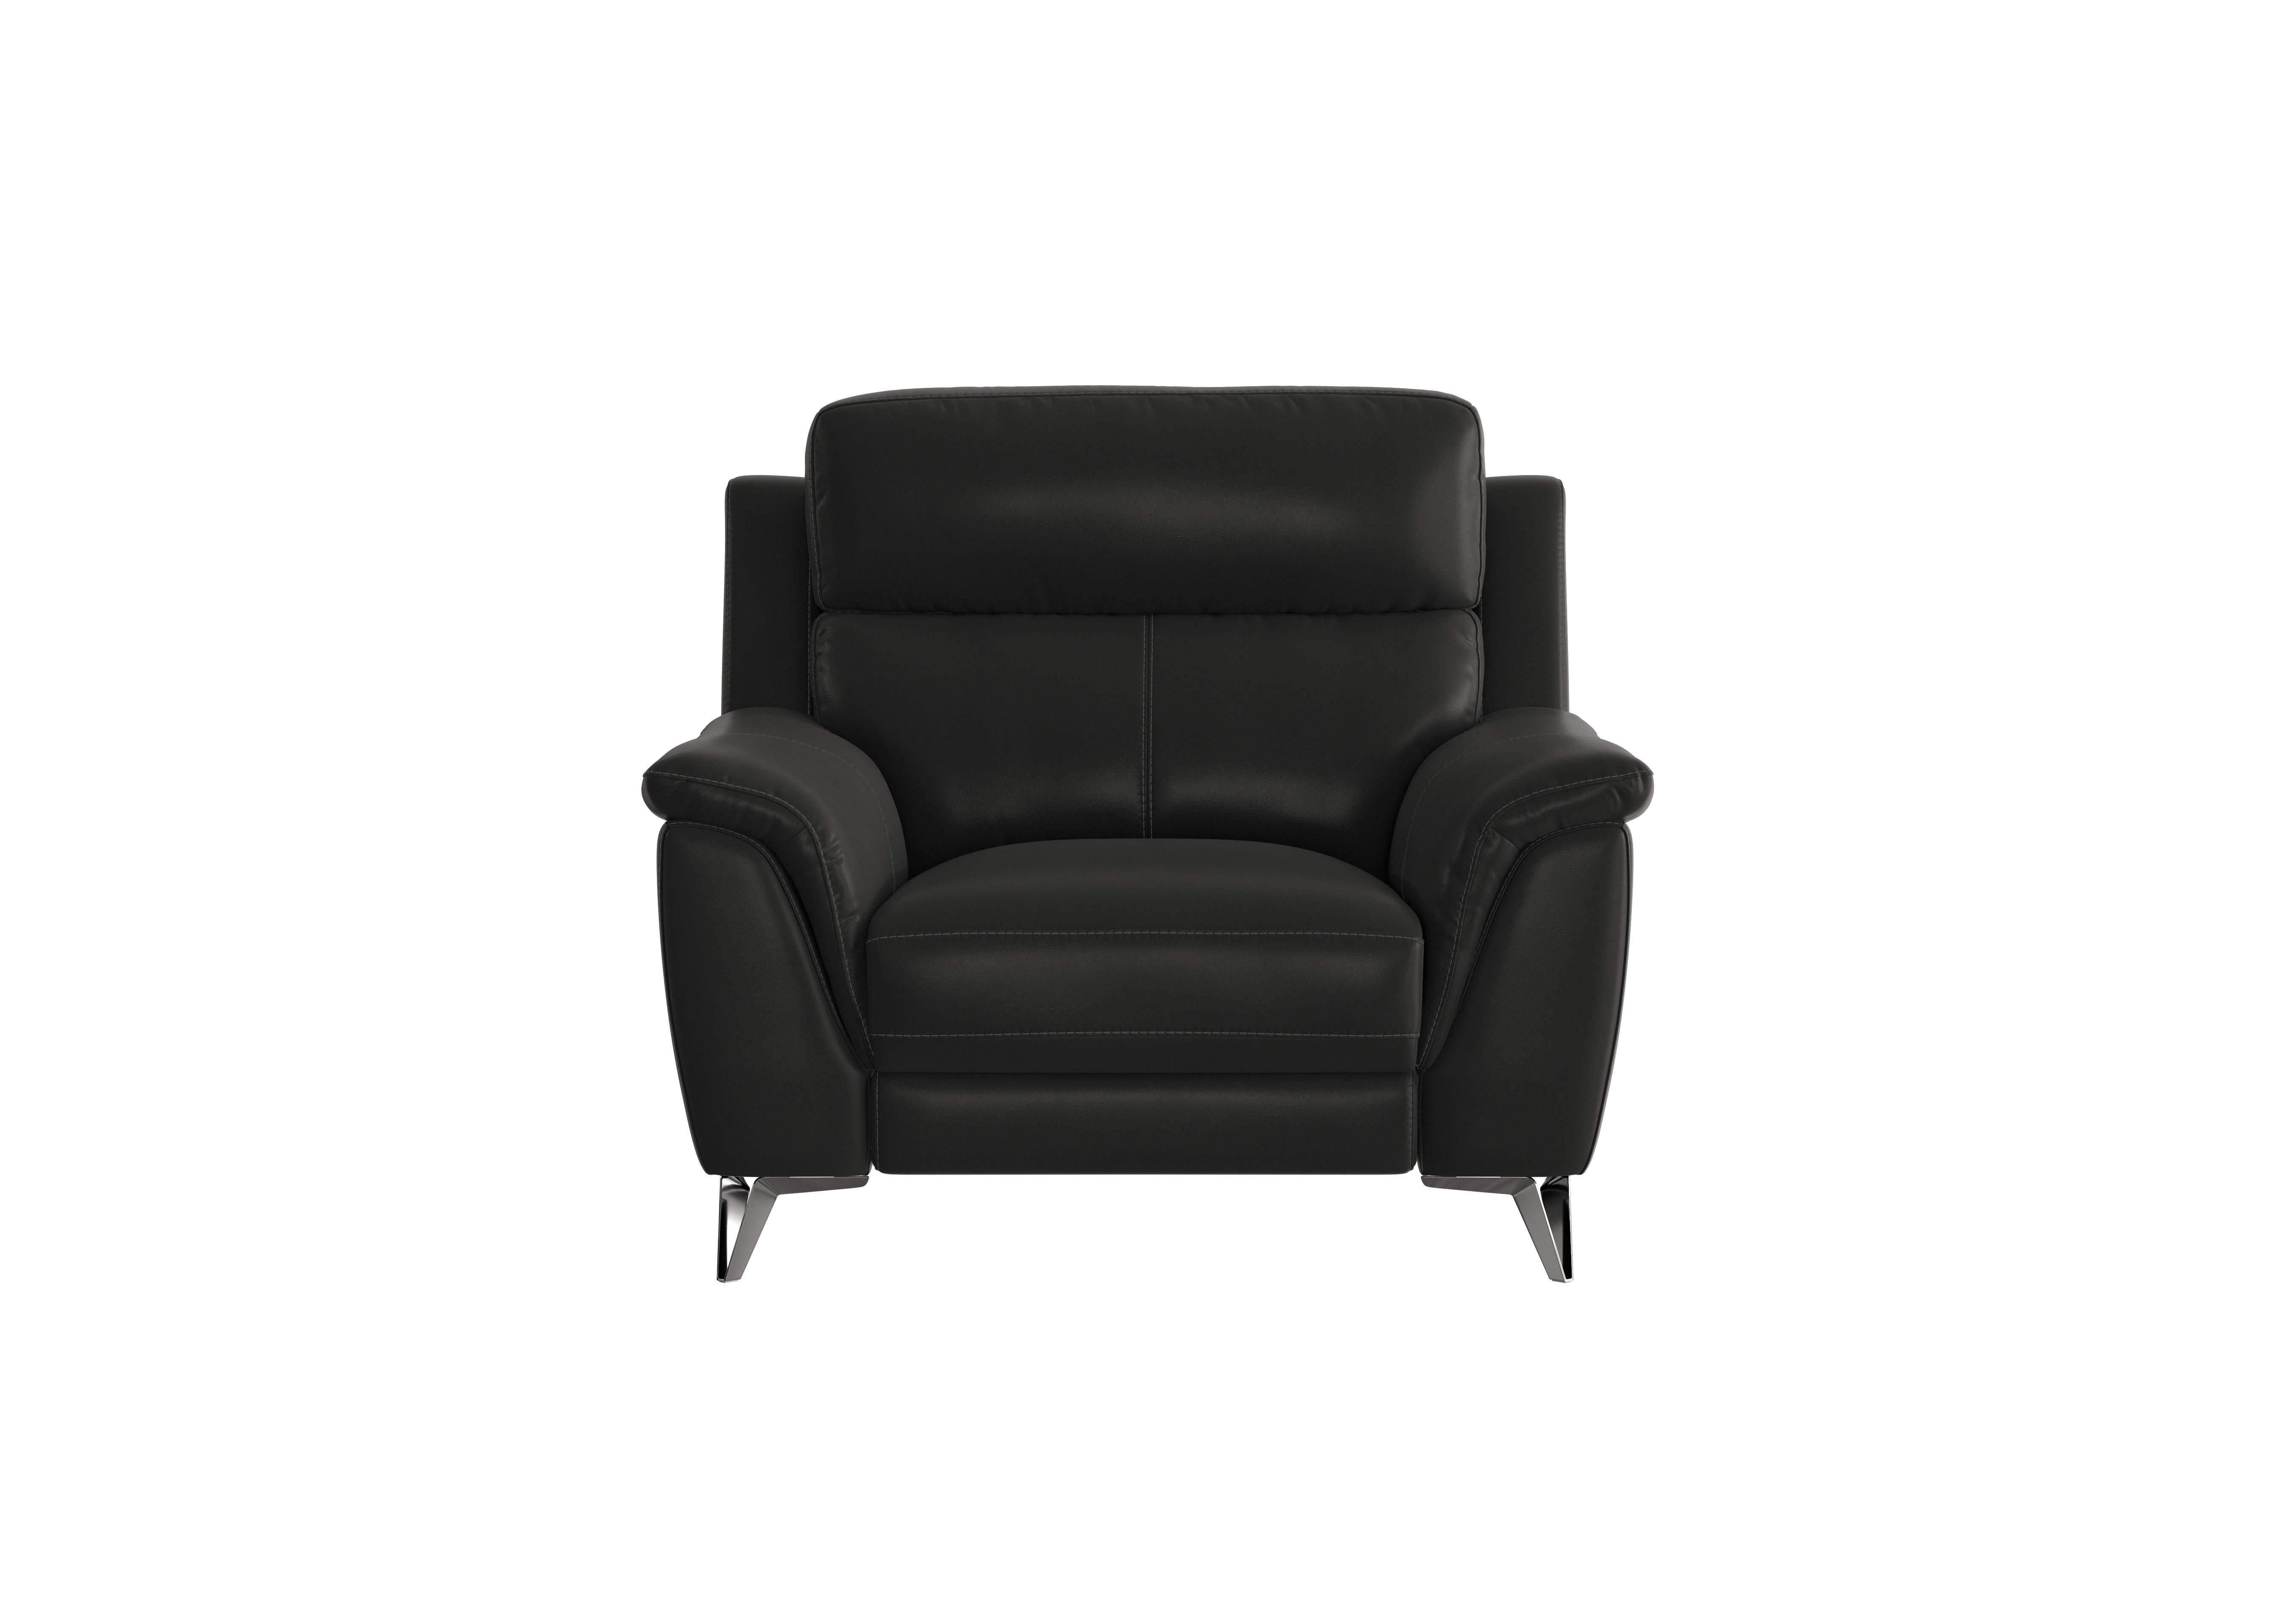 Contempo Leather Armchair in Bv-3500 Classic Black on Furniture Village